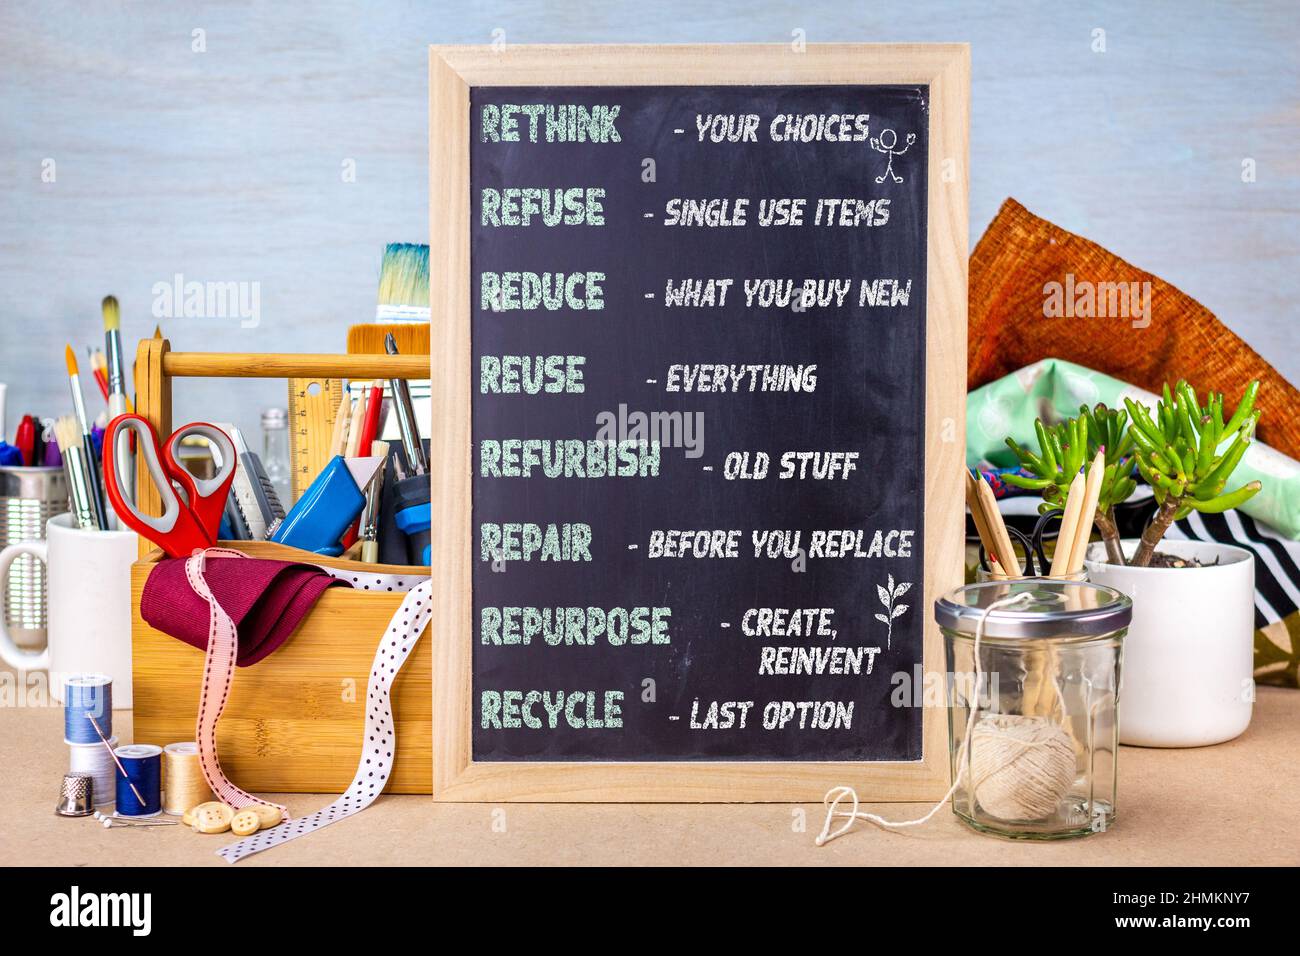 R's of sustainable waste management on chalkboard placed on workshop bench with tools and materials for repair, repurpose, refurbish Stock Photo